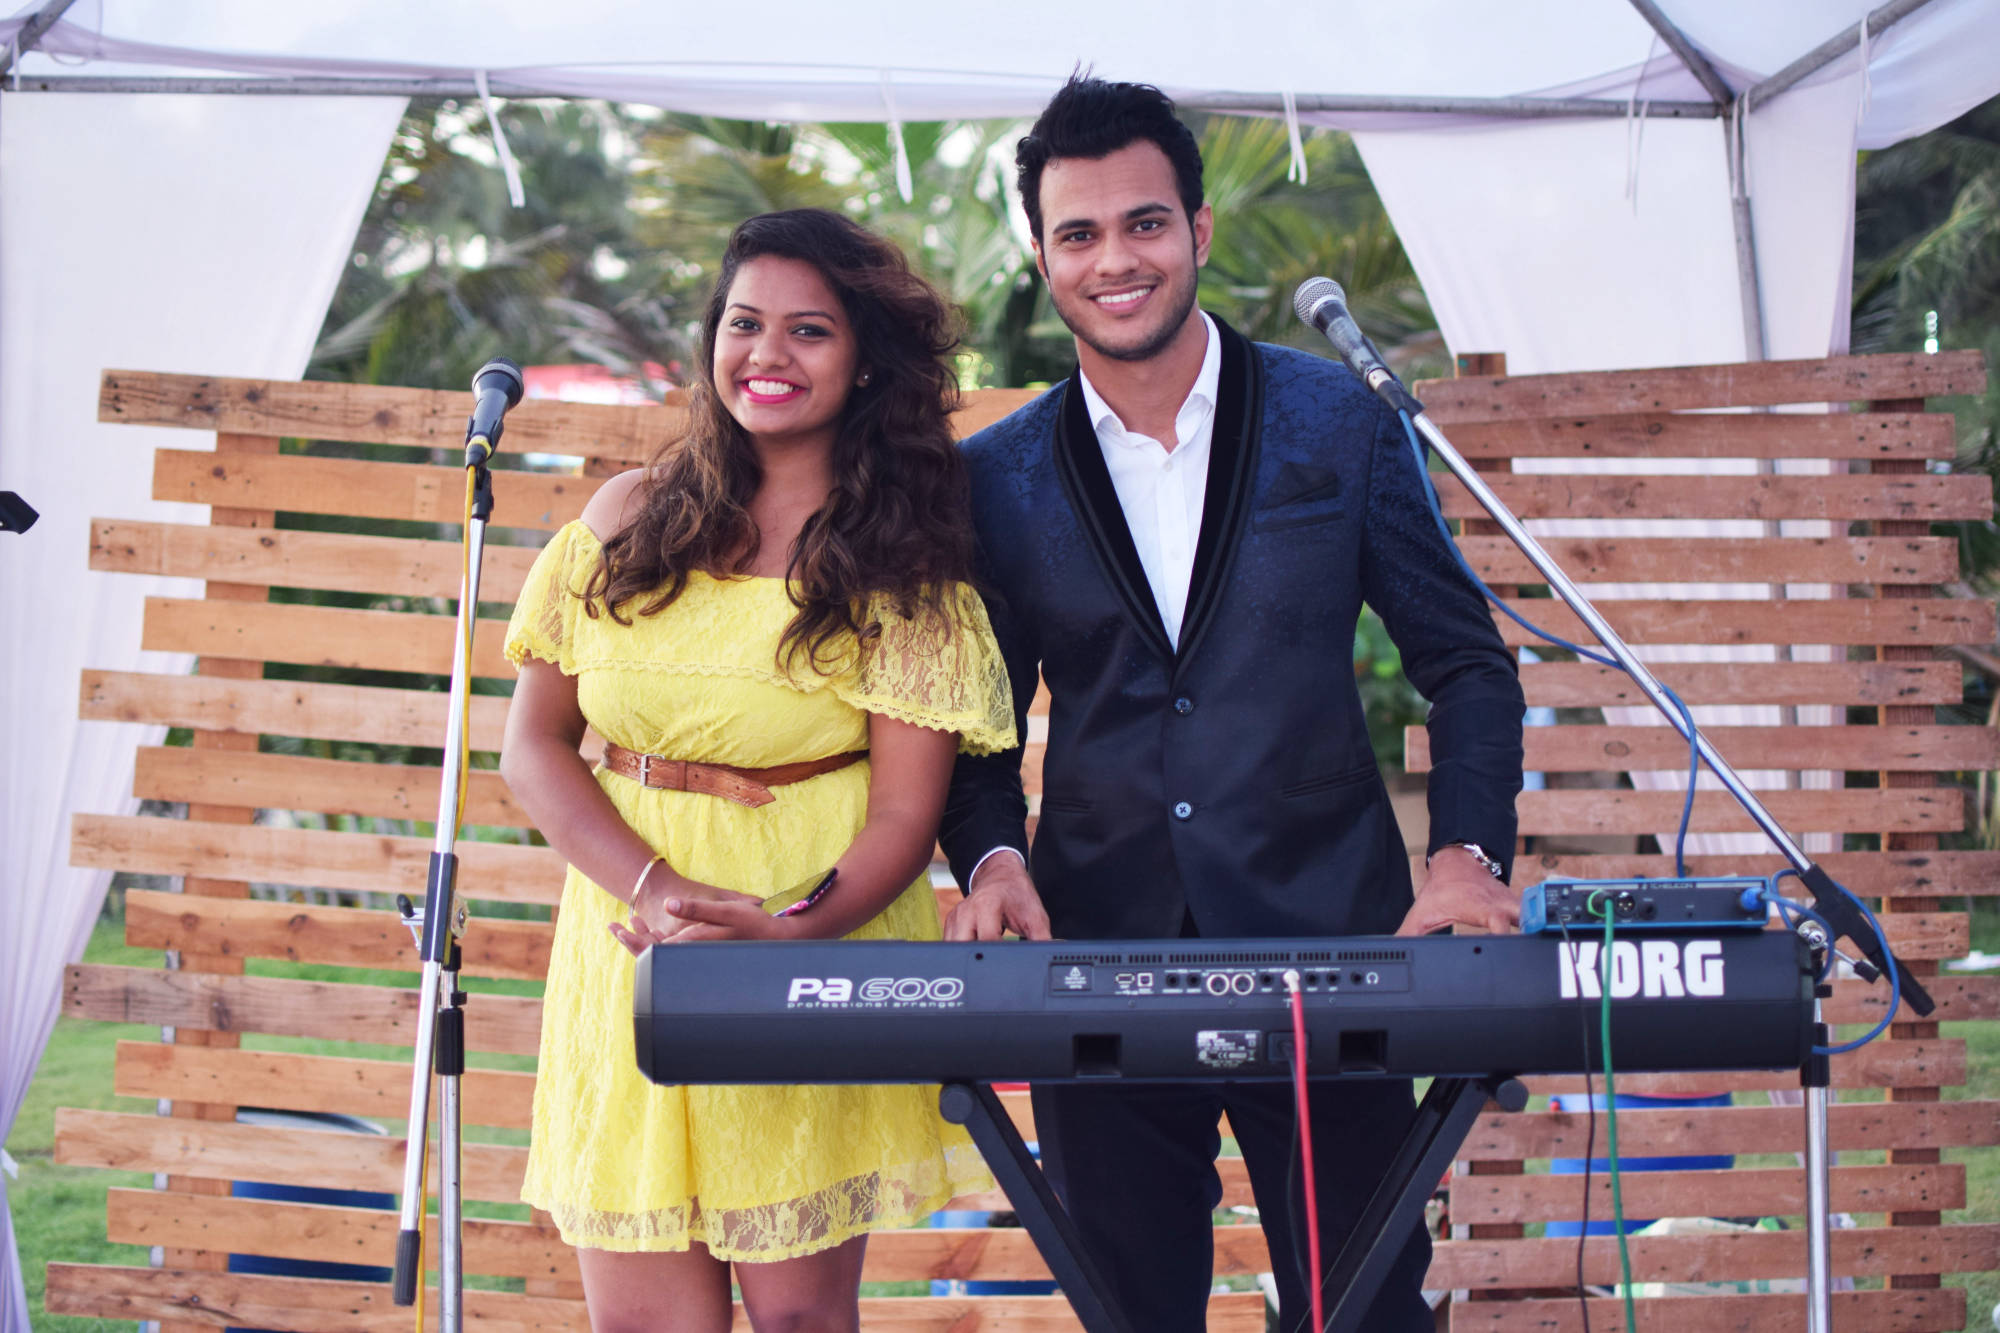 Alison and Ancy Performing at an Outdoor Event in Goa